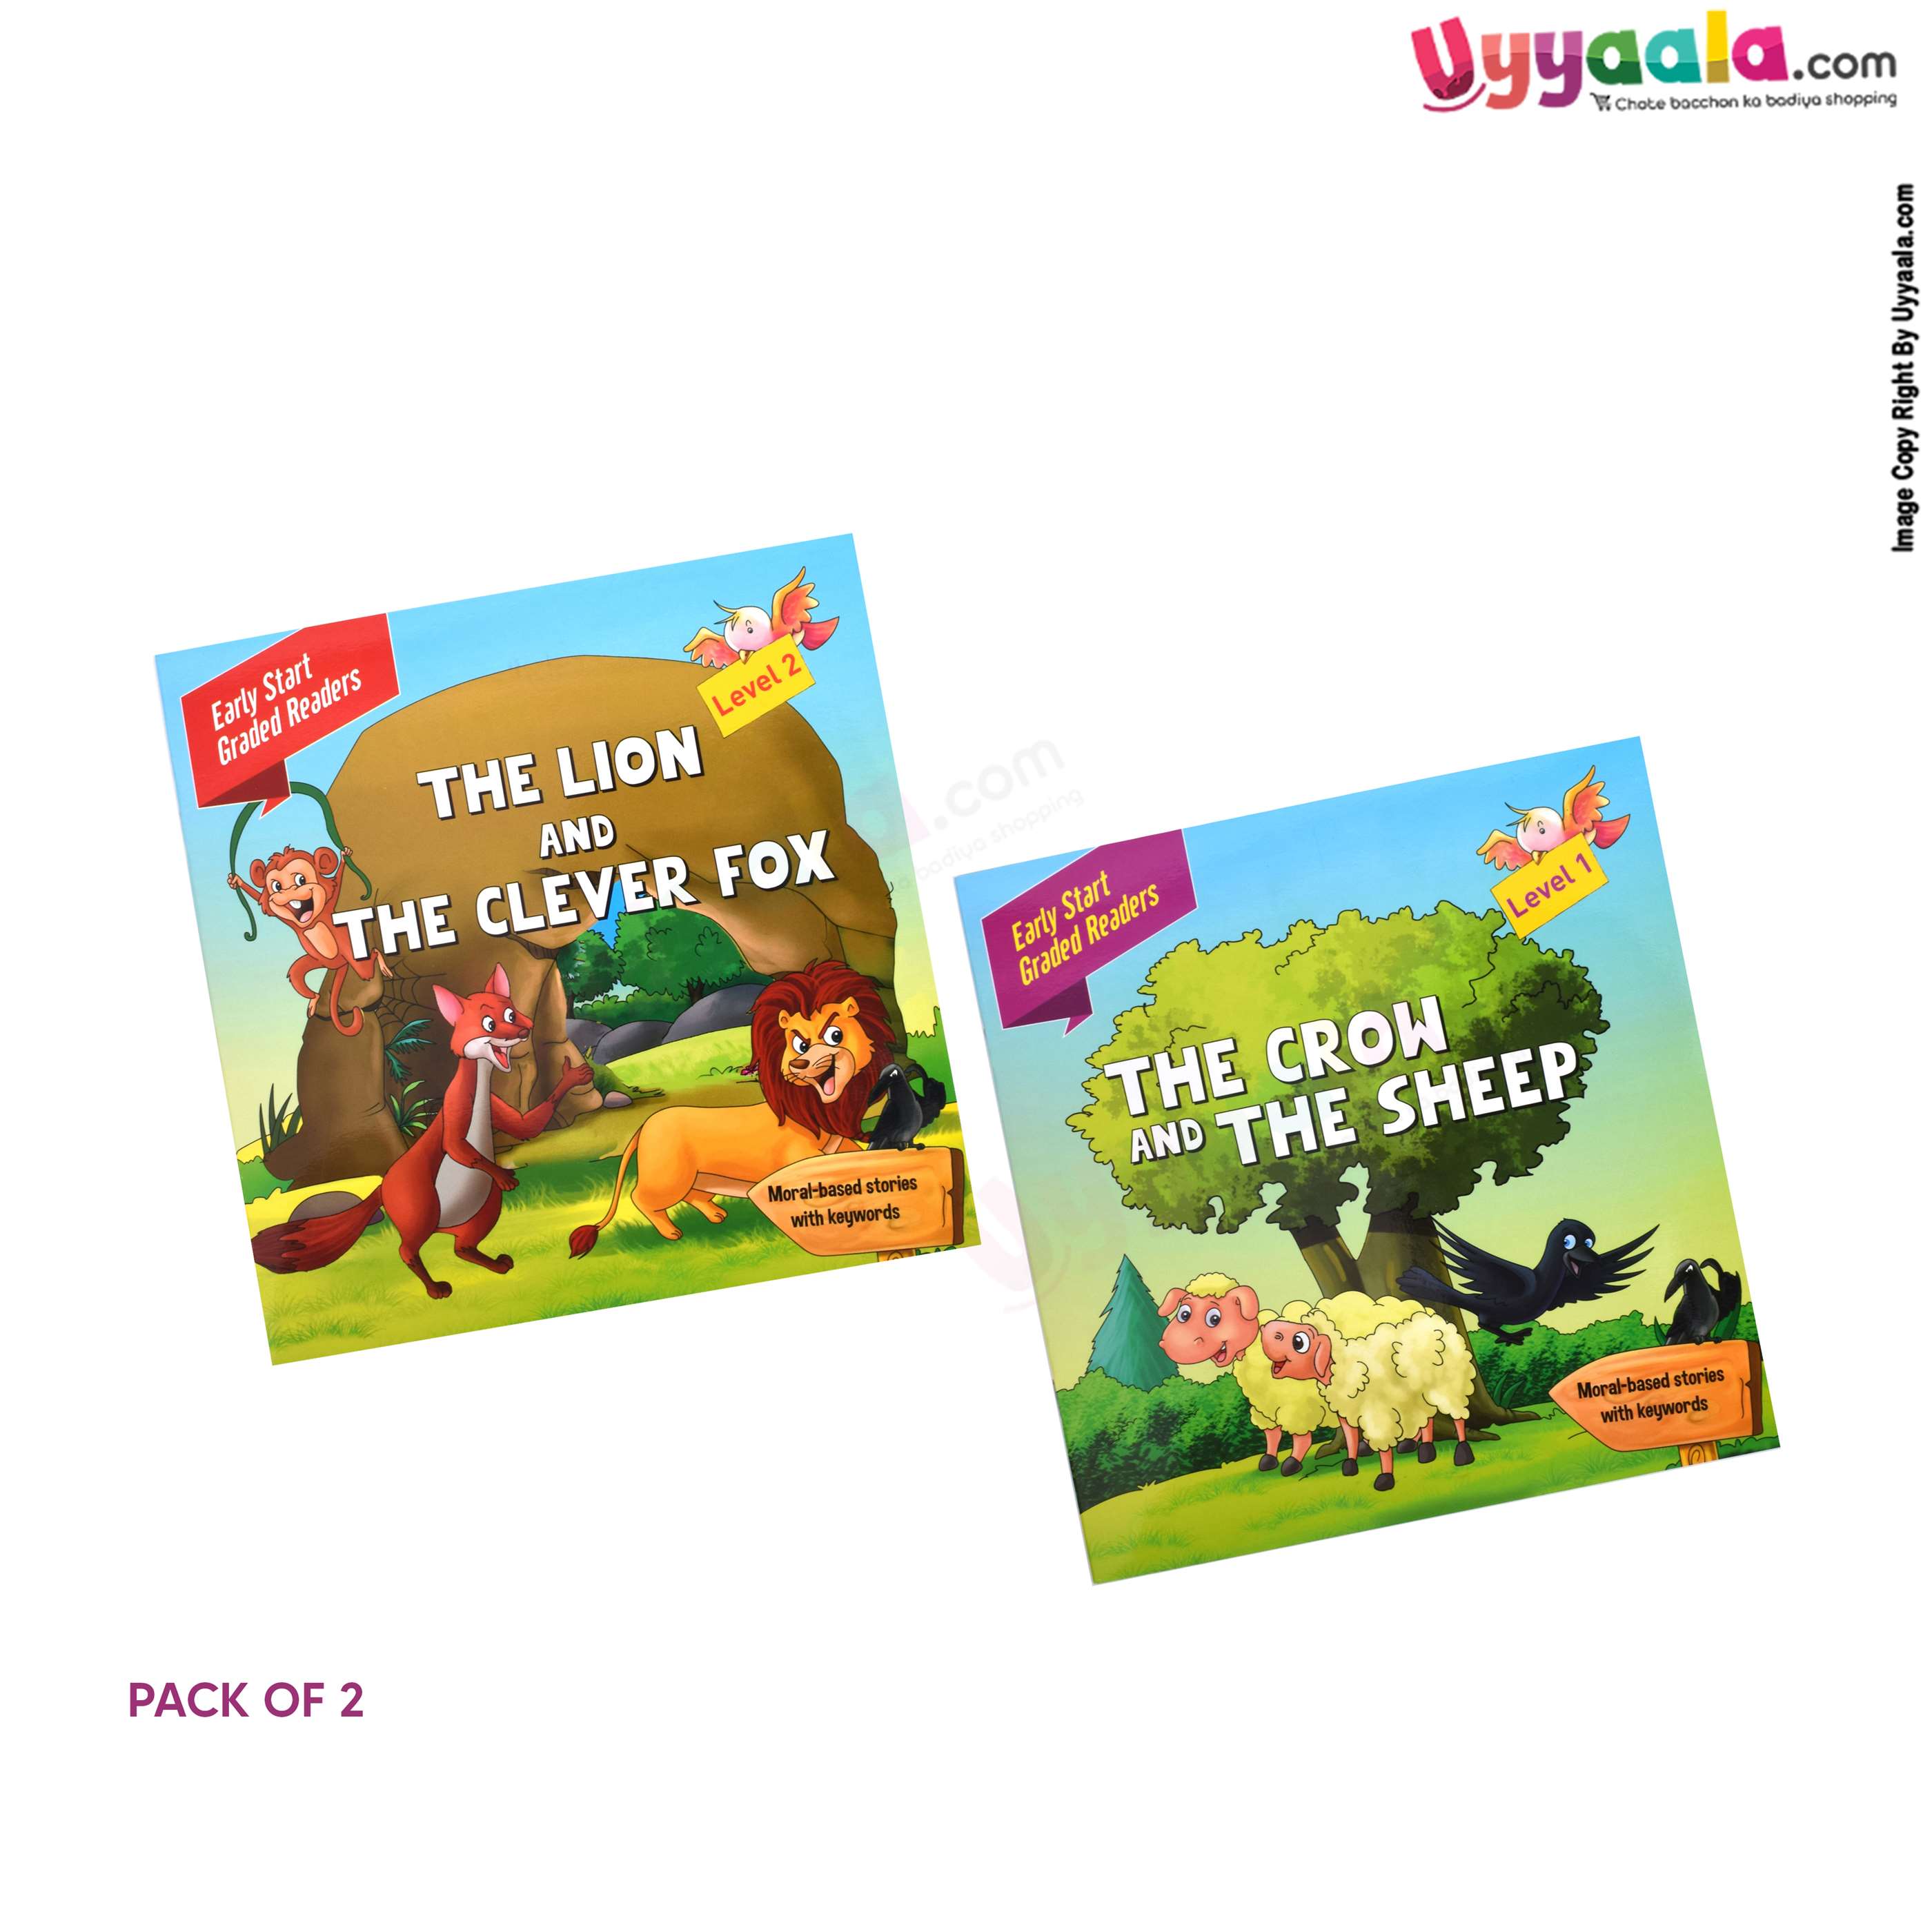 Early start graded readers - the crow and the sheep & the lion and the clever fox - pack of 2 - 2 volumes (2 - 5 years)